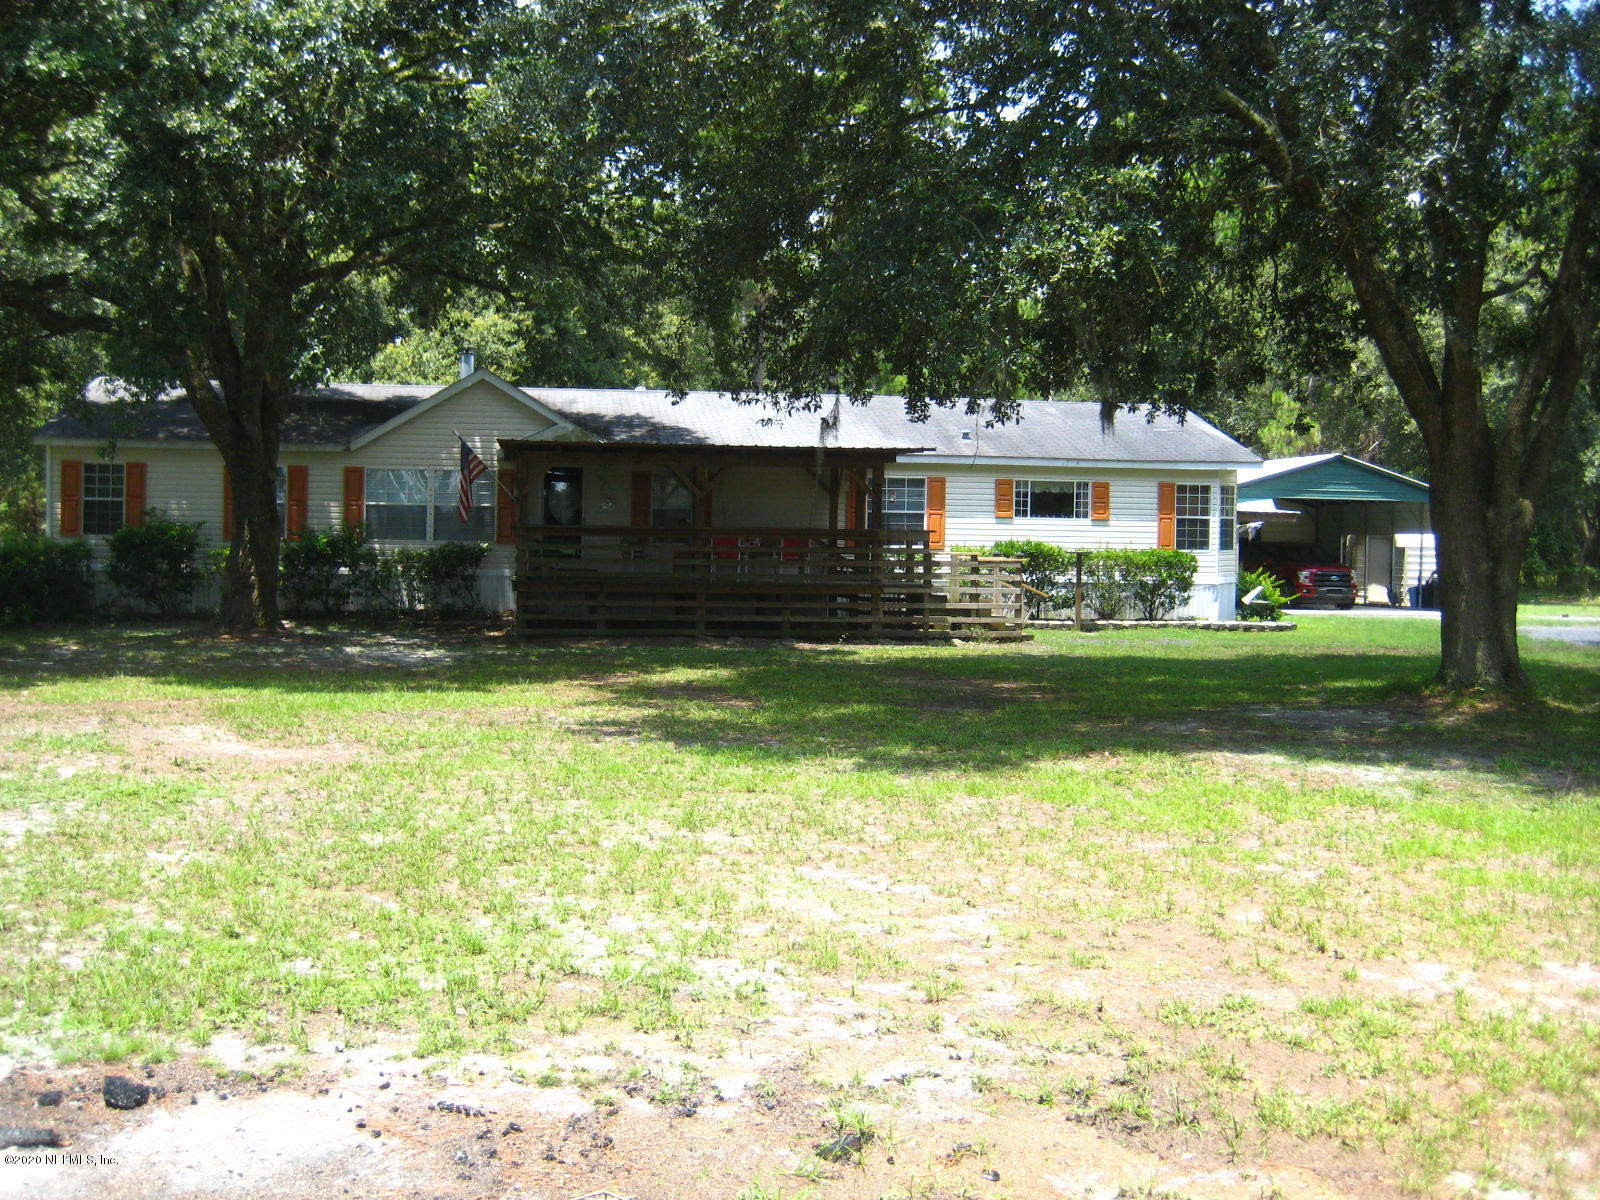 a front view of house with yard and trees in the background